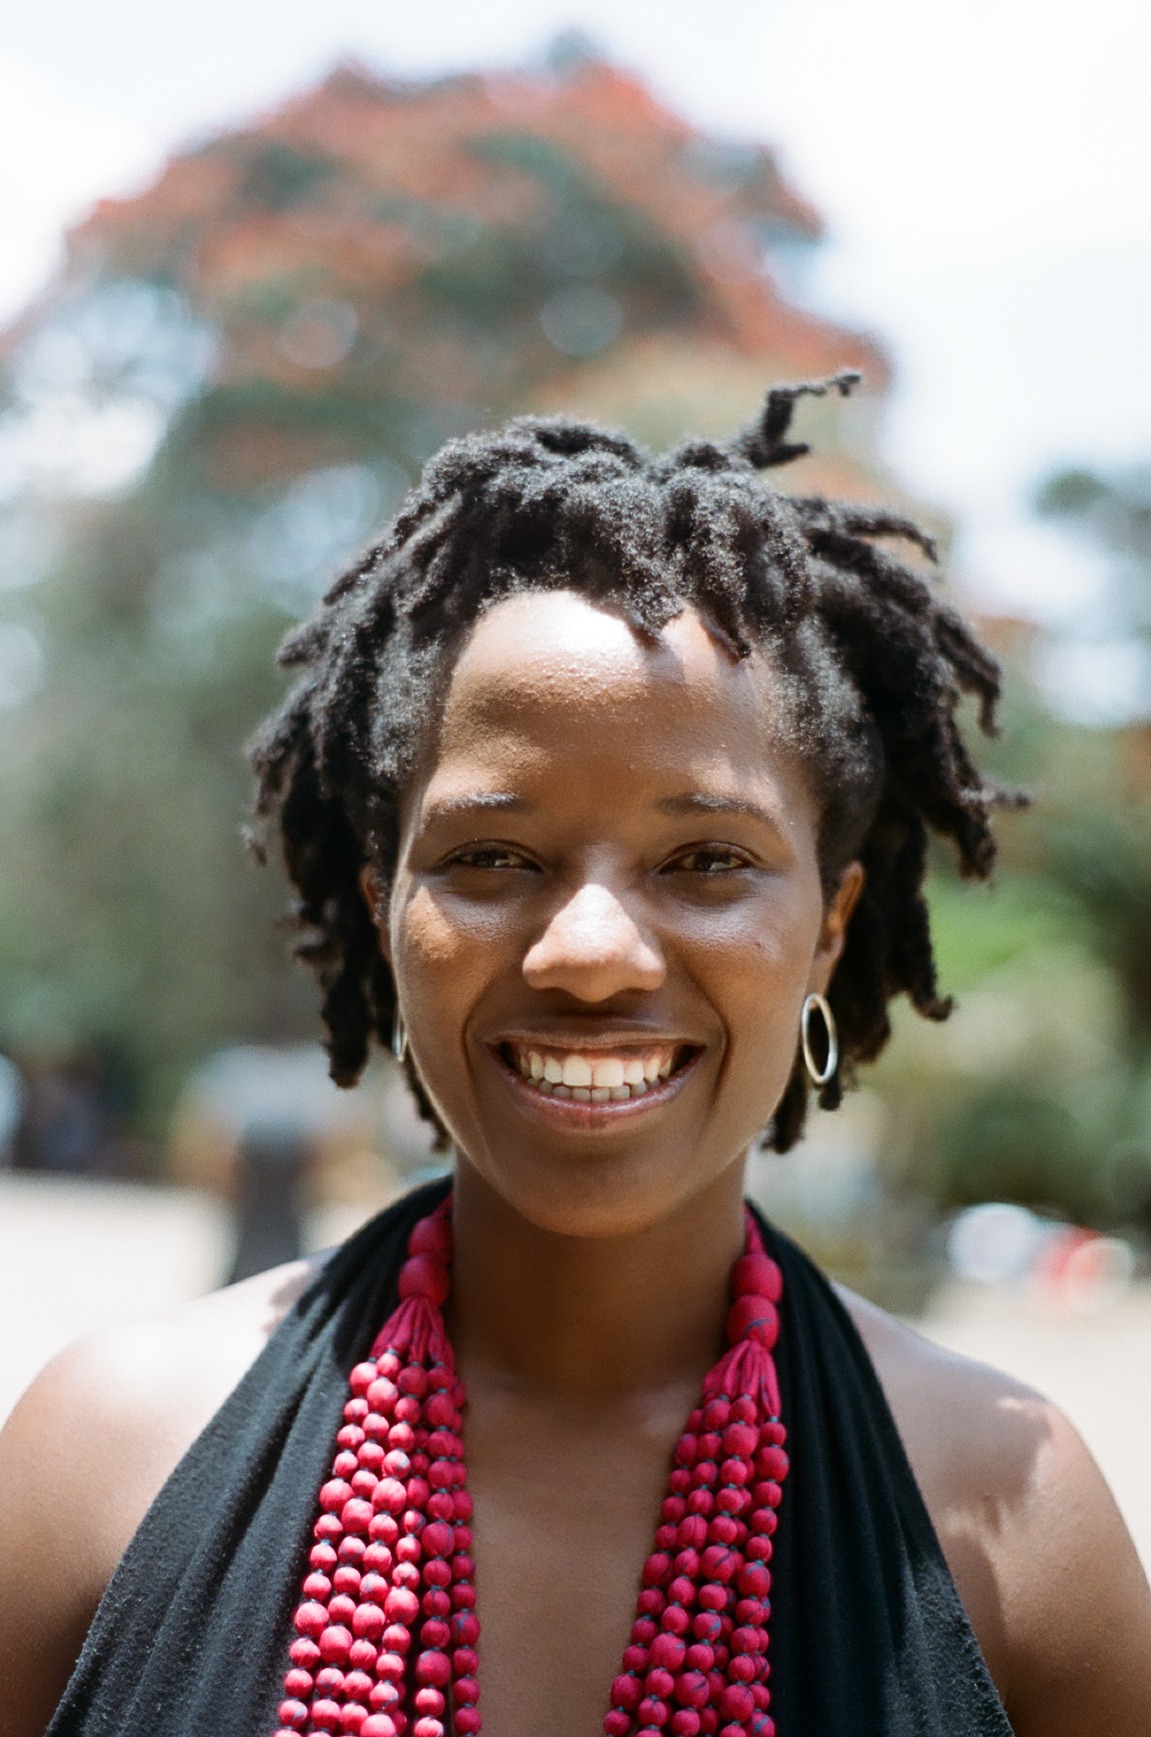 Photo portrait of young African woman smiling with dreads, a black top and a hot pink beaded necklace.